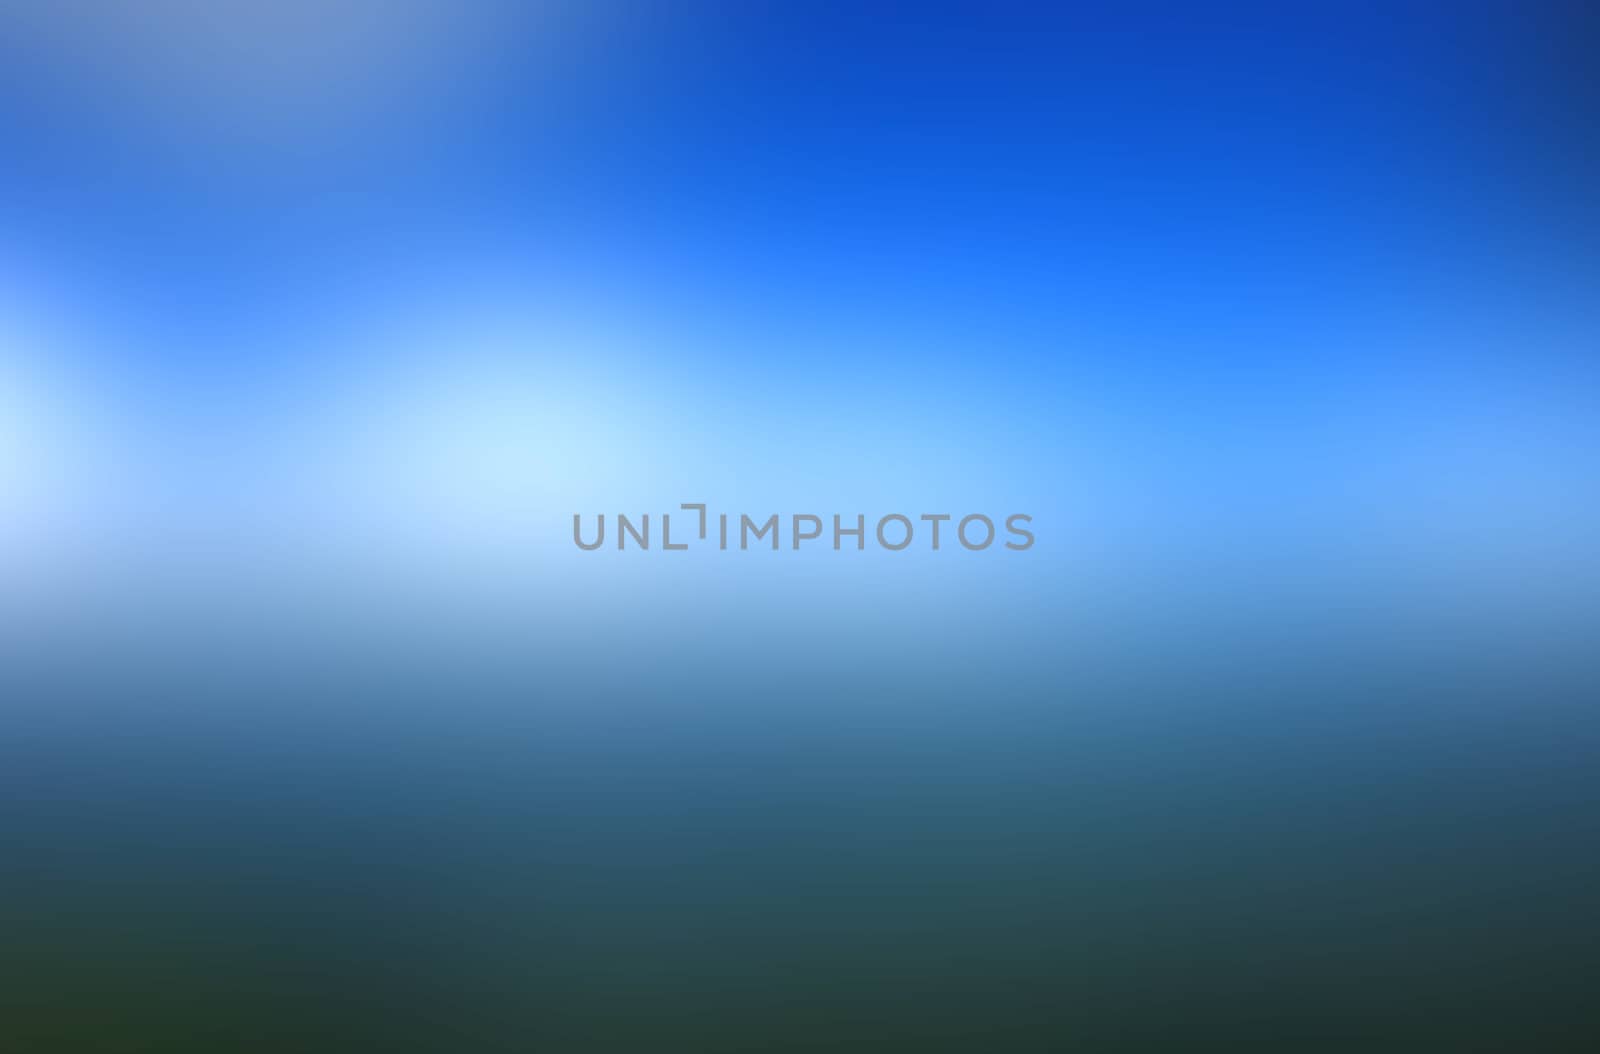 Abstract Blurred gradient background, for your mockup and template design.